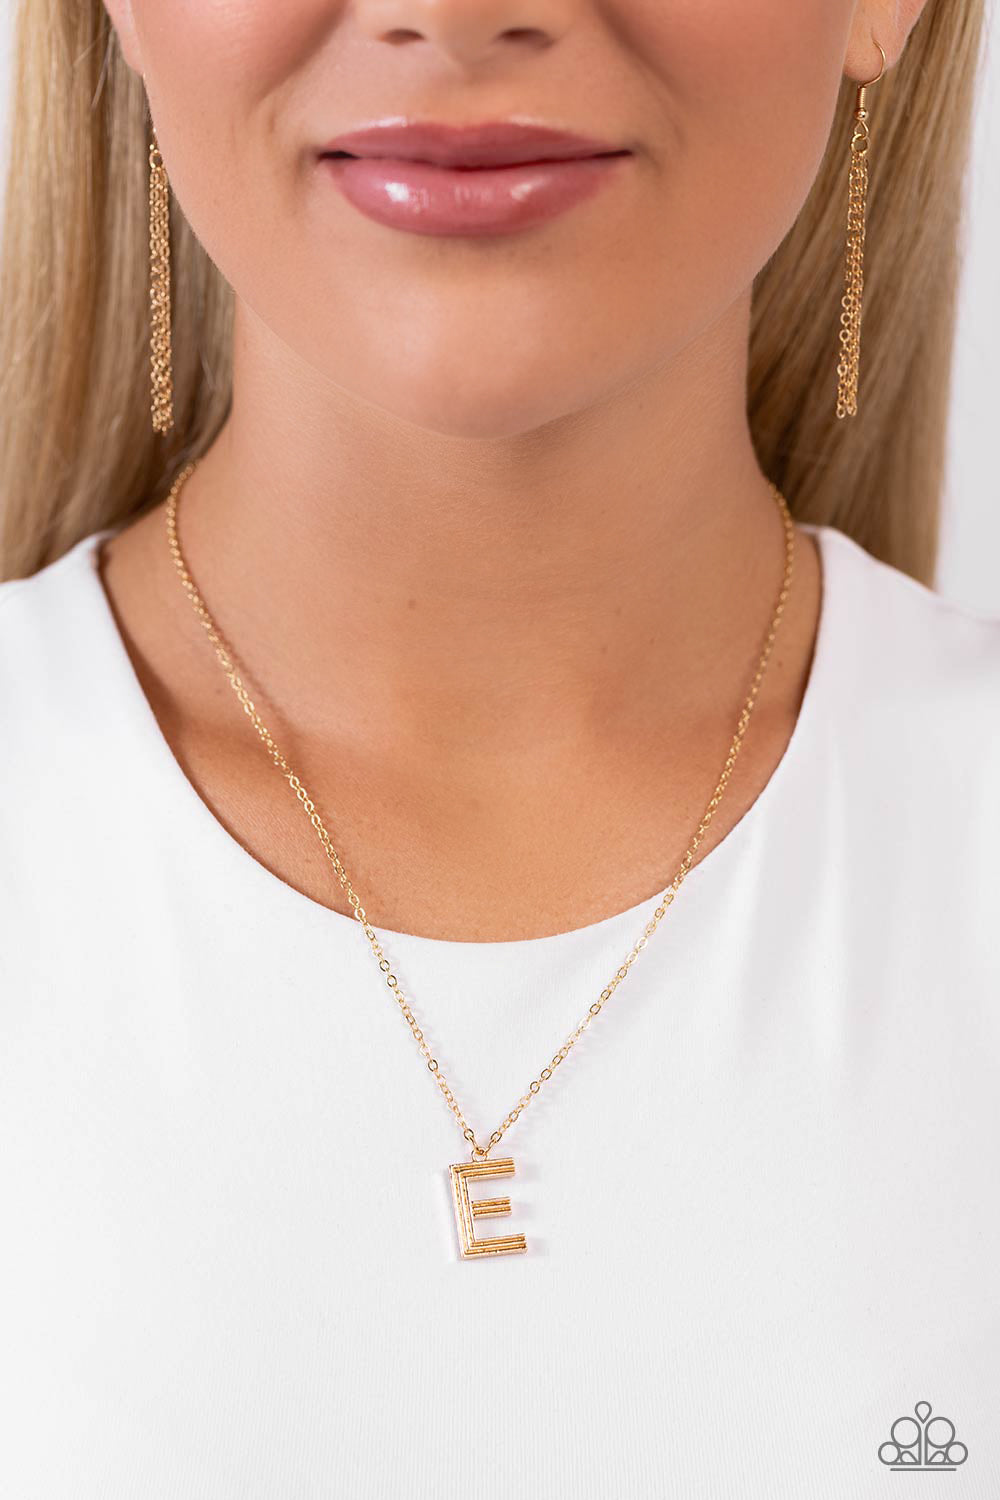 Paparazzi - Leave Your Initials - Gold - E Necklace